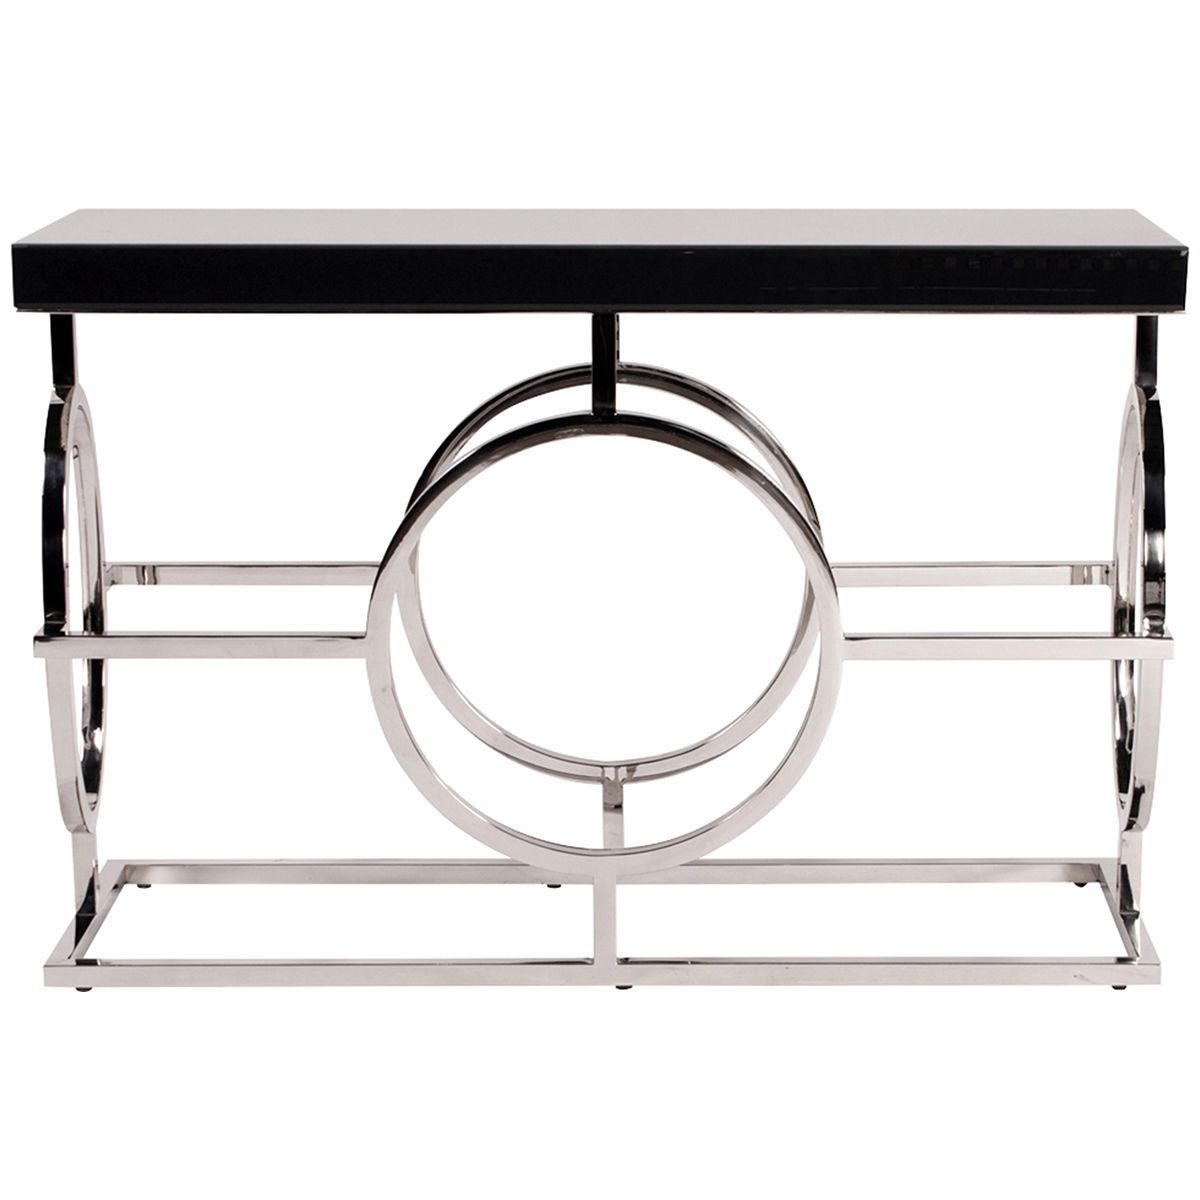 Howard Elliott Stainless Steel Console Table With Black Top 11182 Regarding Silver Stainless Steel Console Tables (View 11 of 20)